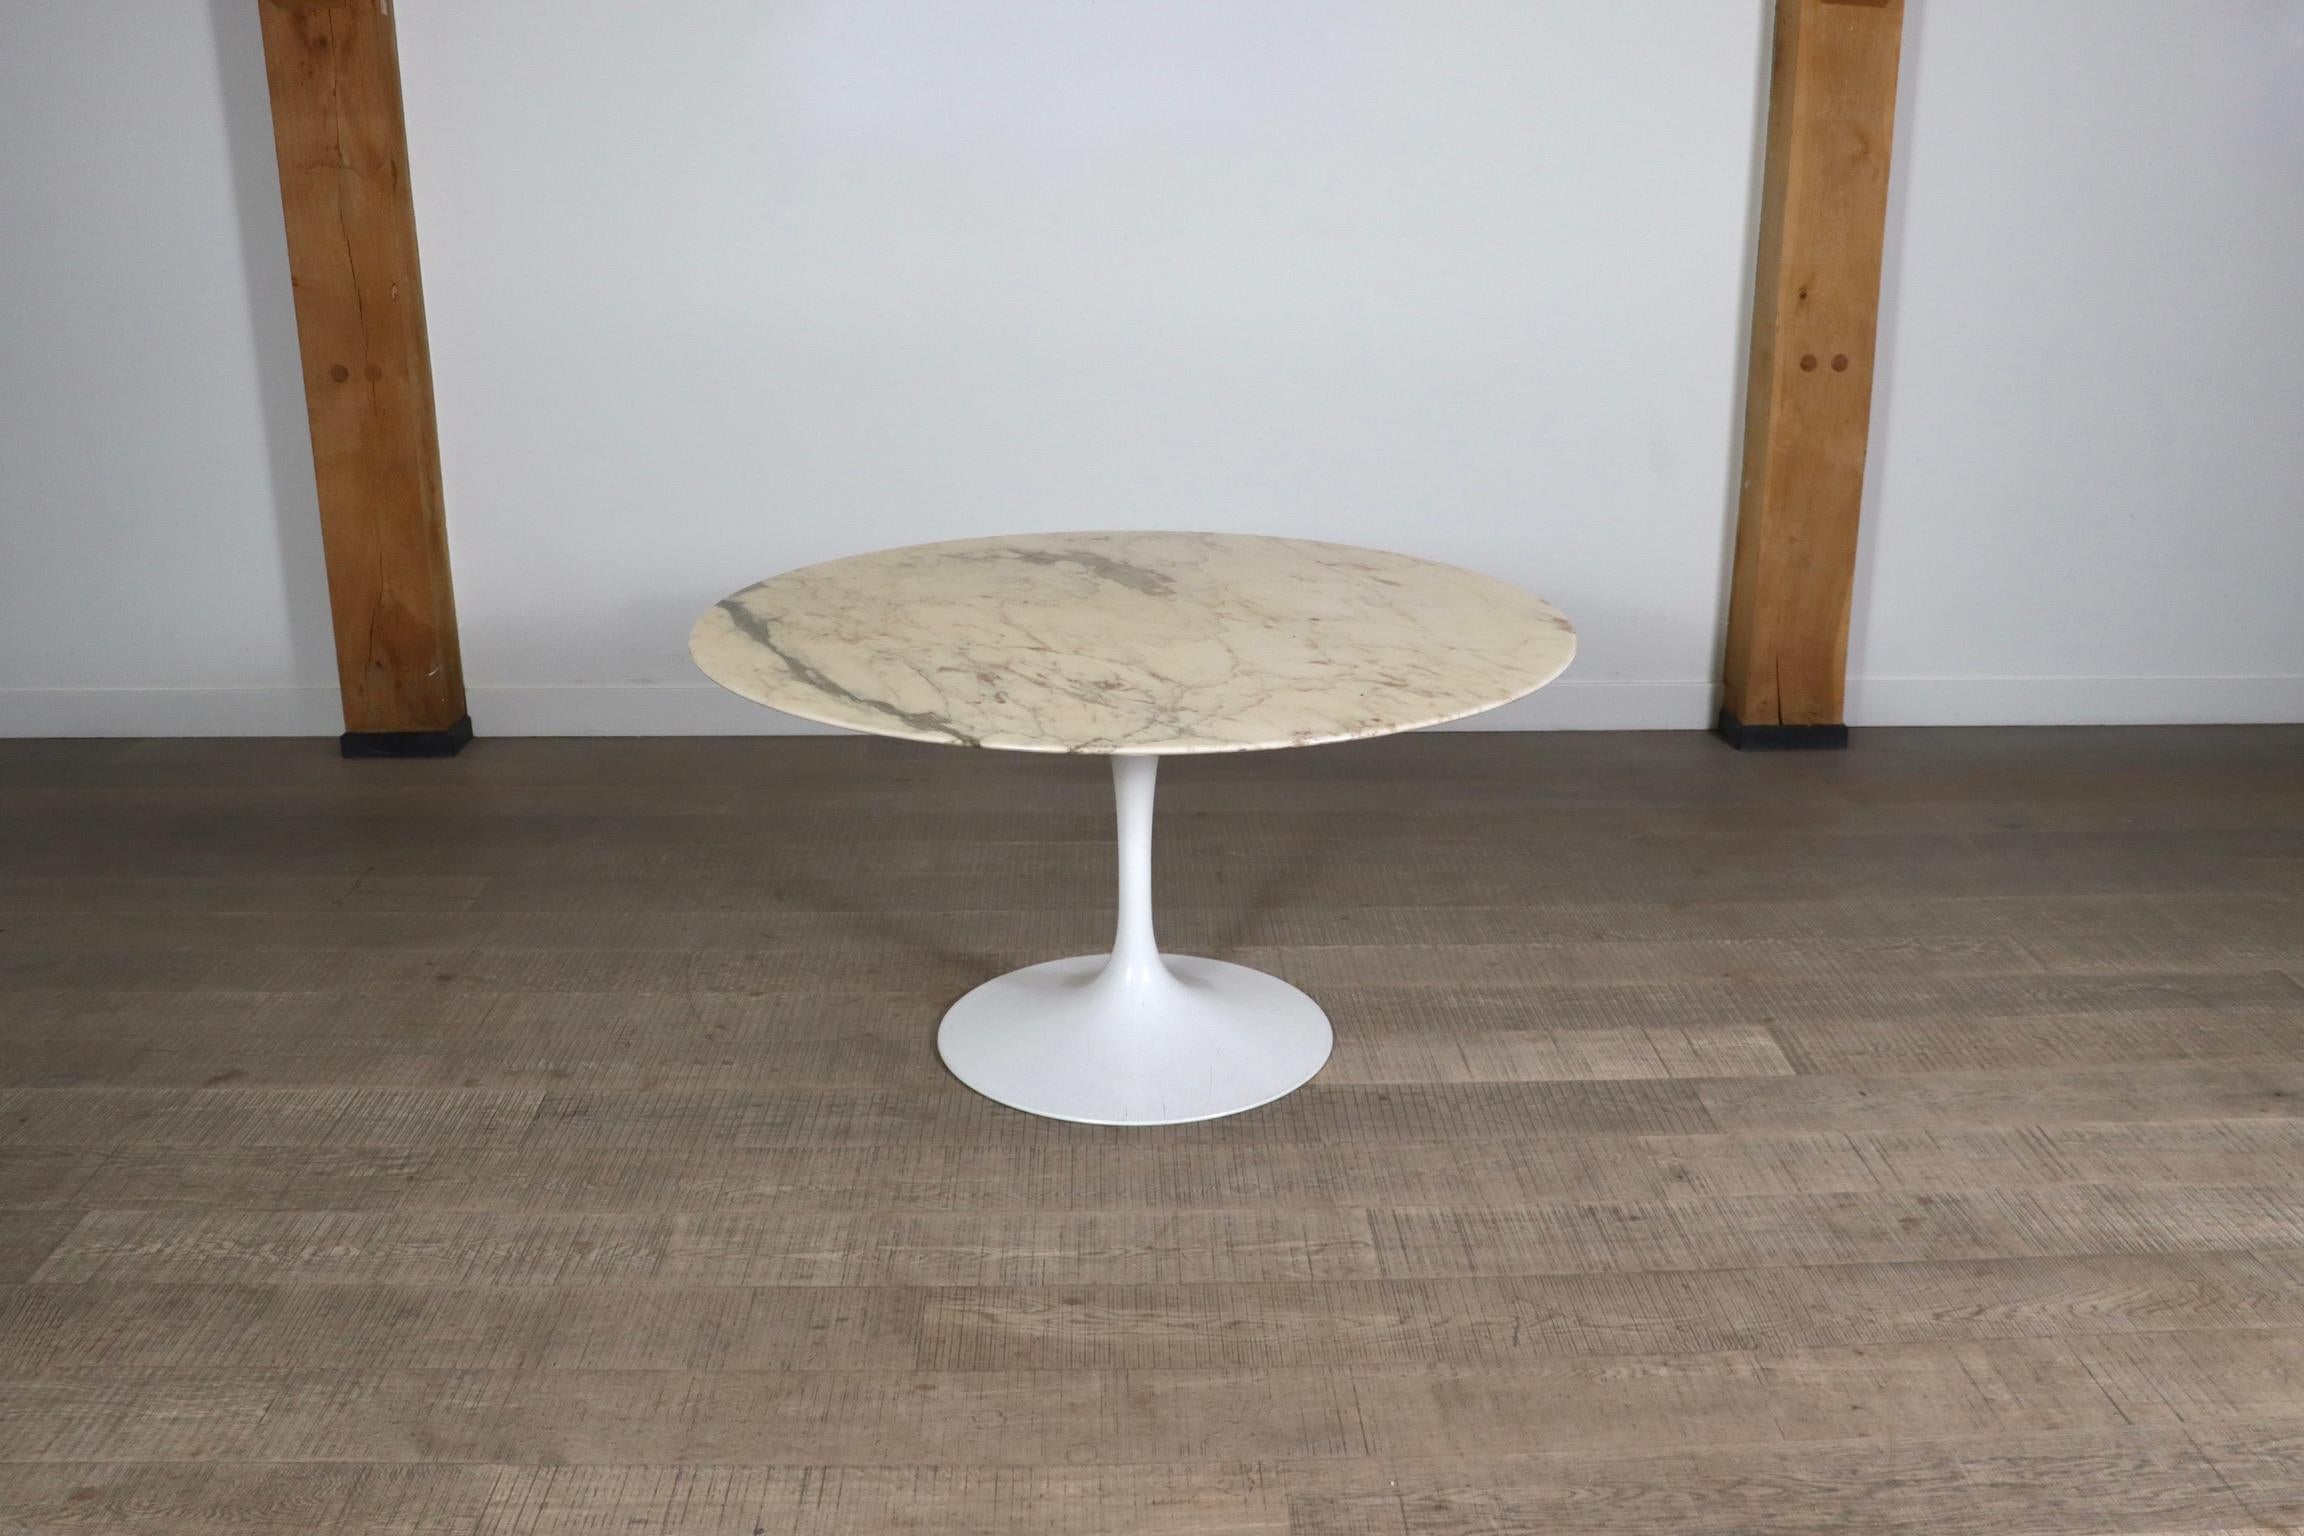 Nice round shaped vintage marble tulip dining table, designed by Eero Saarinen for Knoll International. This timeless design will instantly elevate any dining area with its luxurious looks and feeling. The marble is in very good condition and has a